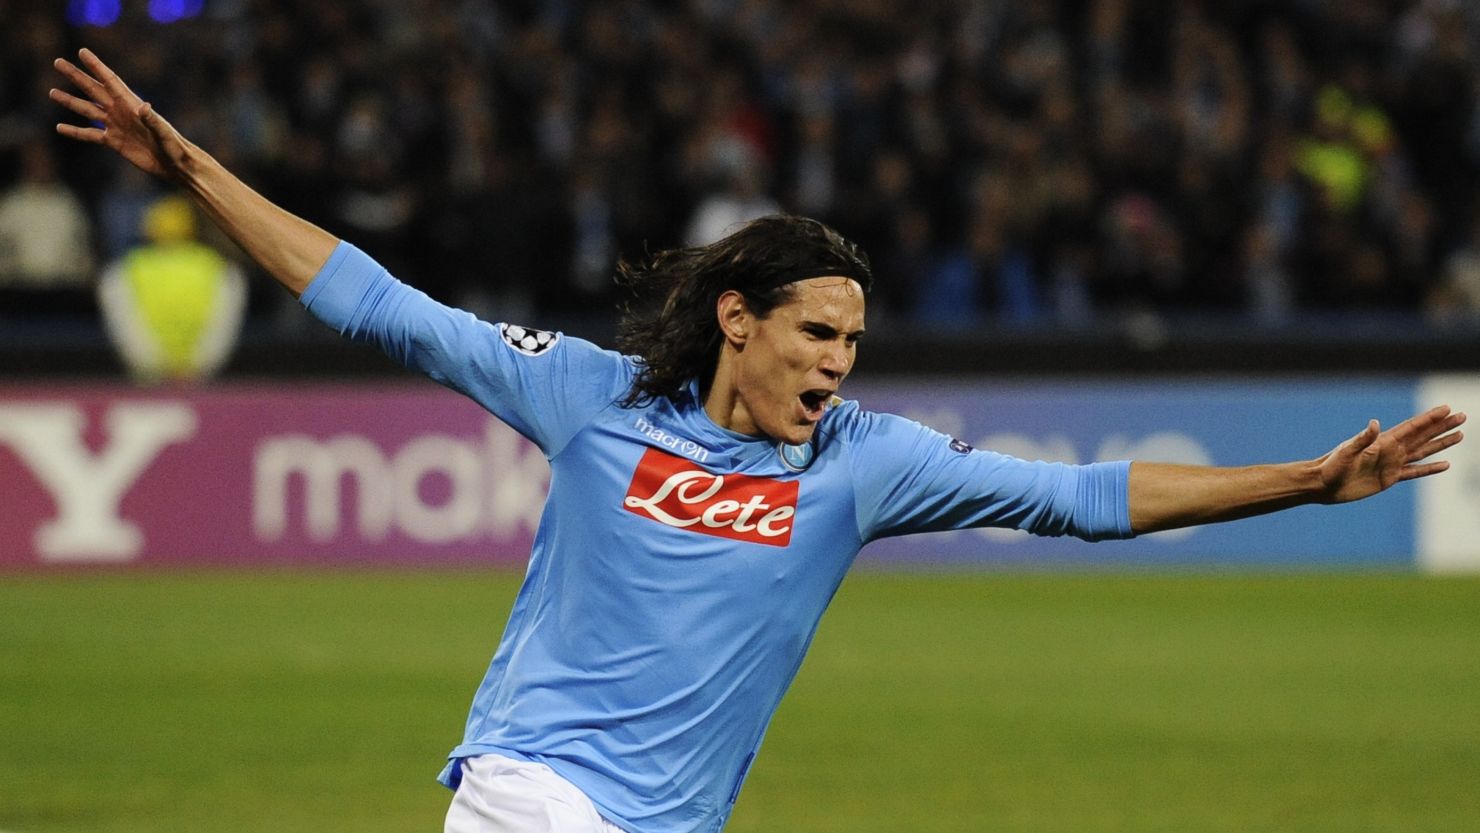 Edinson Cavani's penalty sealed Napoli's first win in Italy's Serie A since January 8.